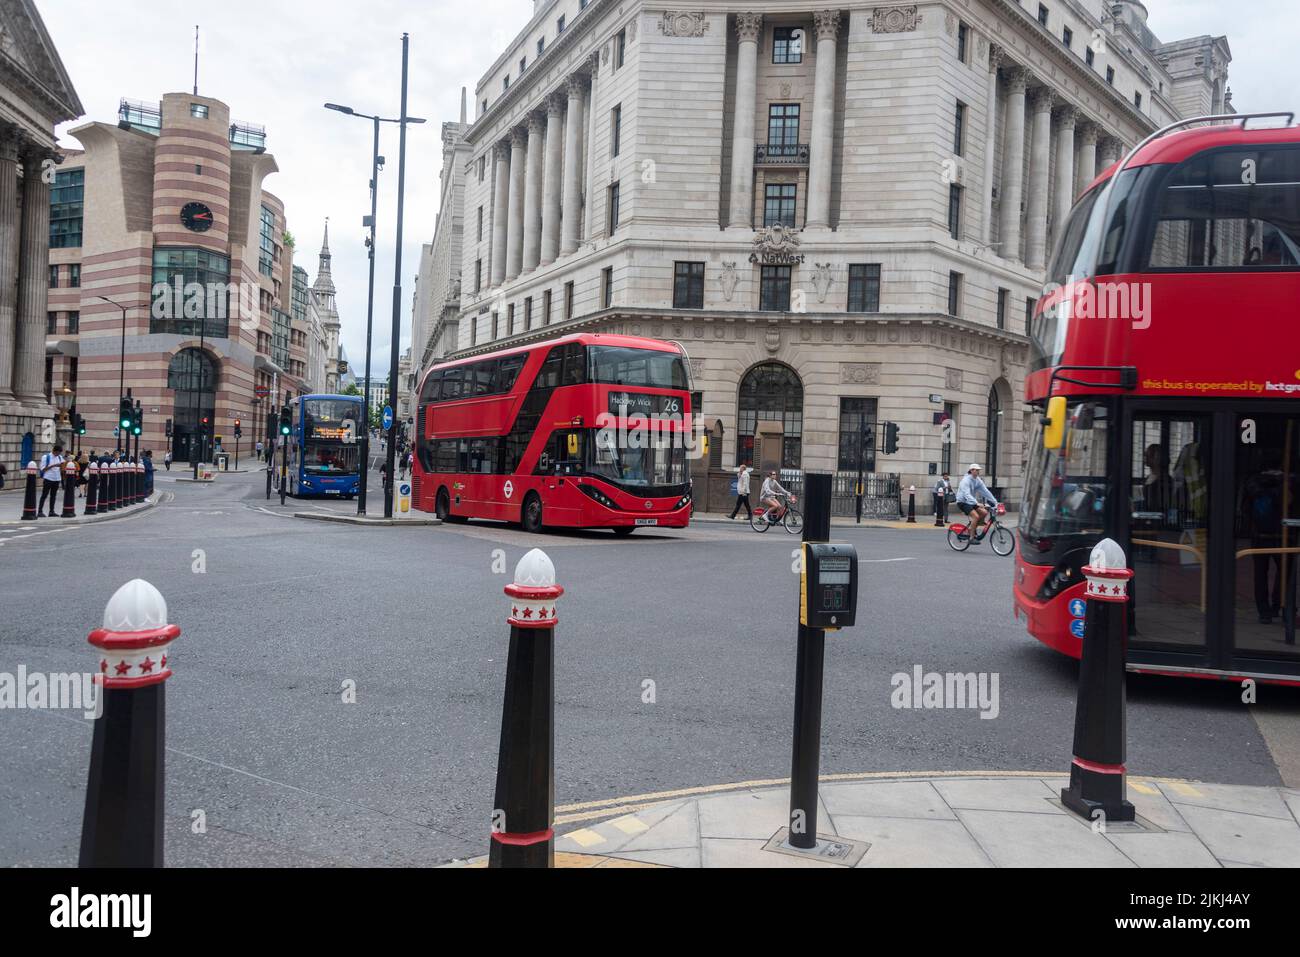 View of postmodern office and commercial building No 1 Poultry in London, near Bank of England, red double decker buses, Great Britain Stock Photo